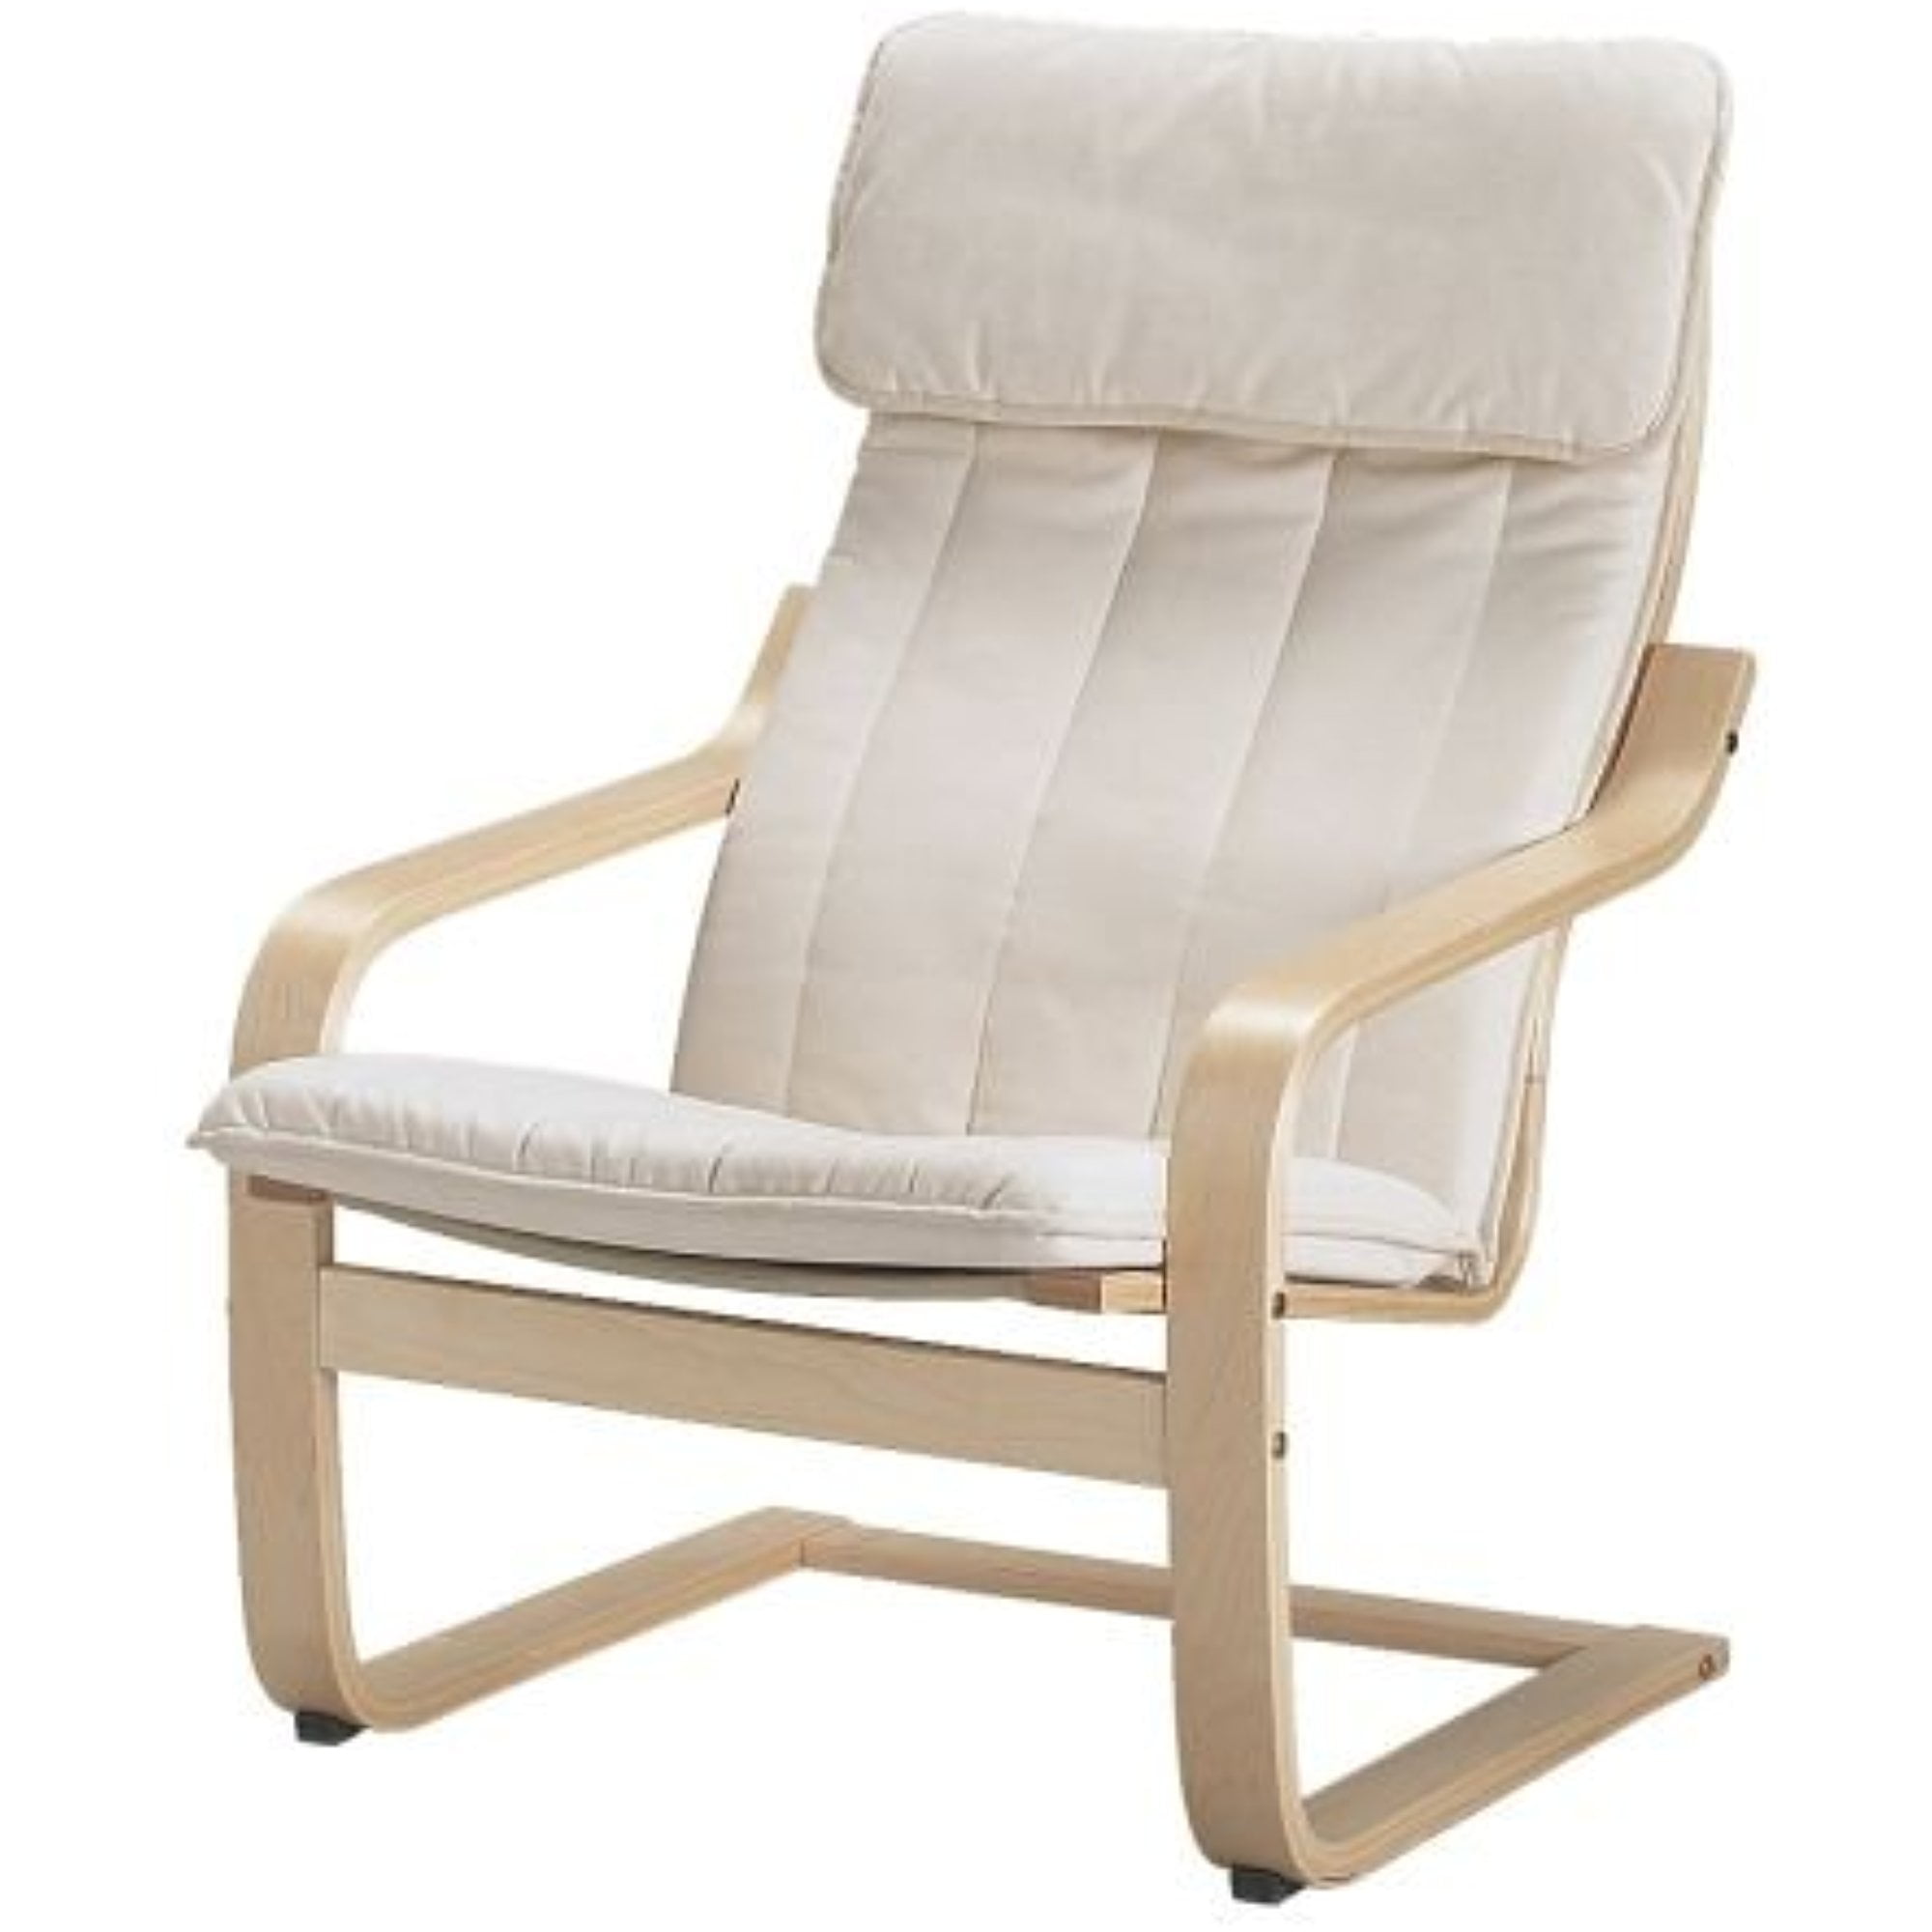 IKEA ' Poang Chair Armchair with Cushion, Cover and Frame (knisa Light Beige) Bundle with Feltectors Cleaning Cloth